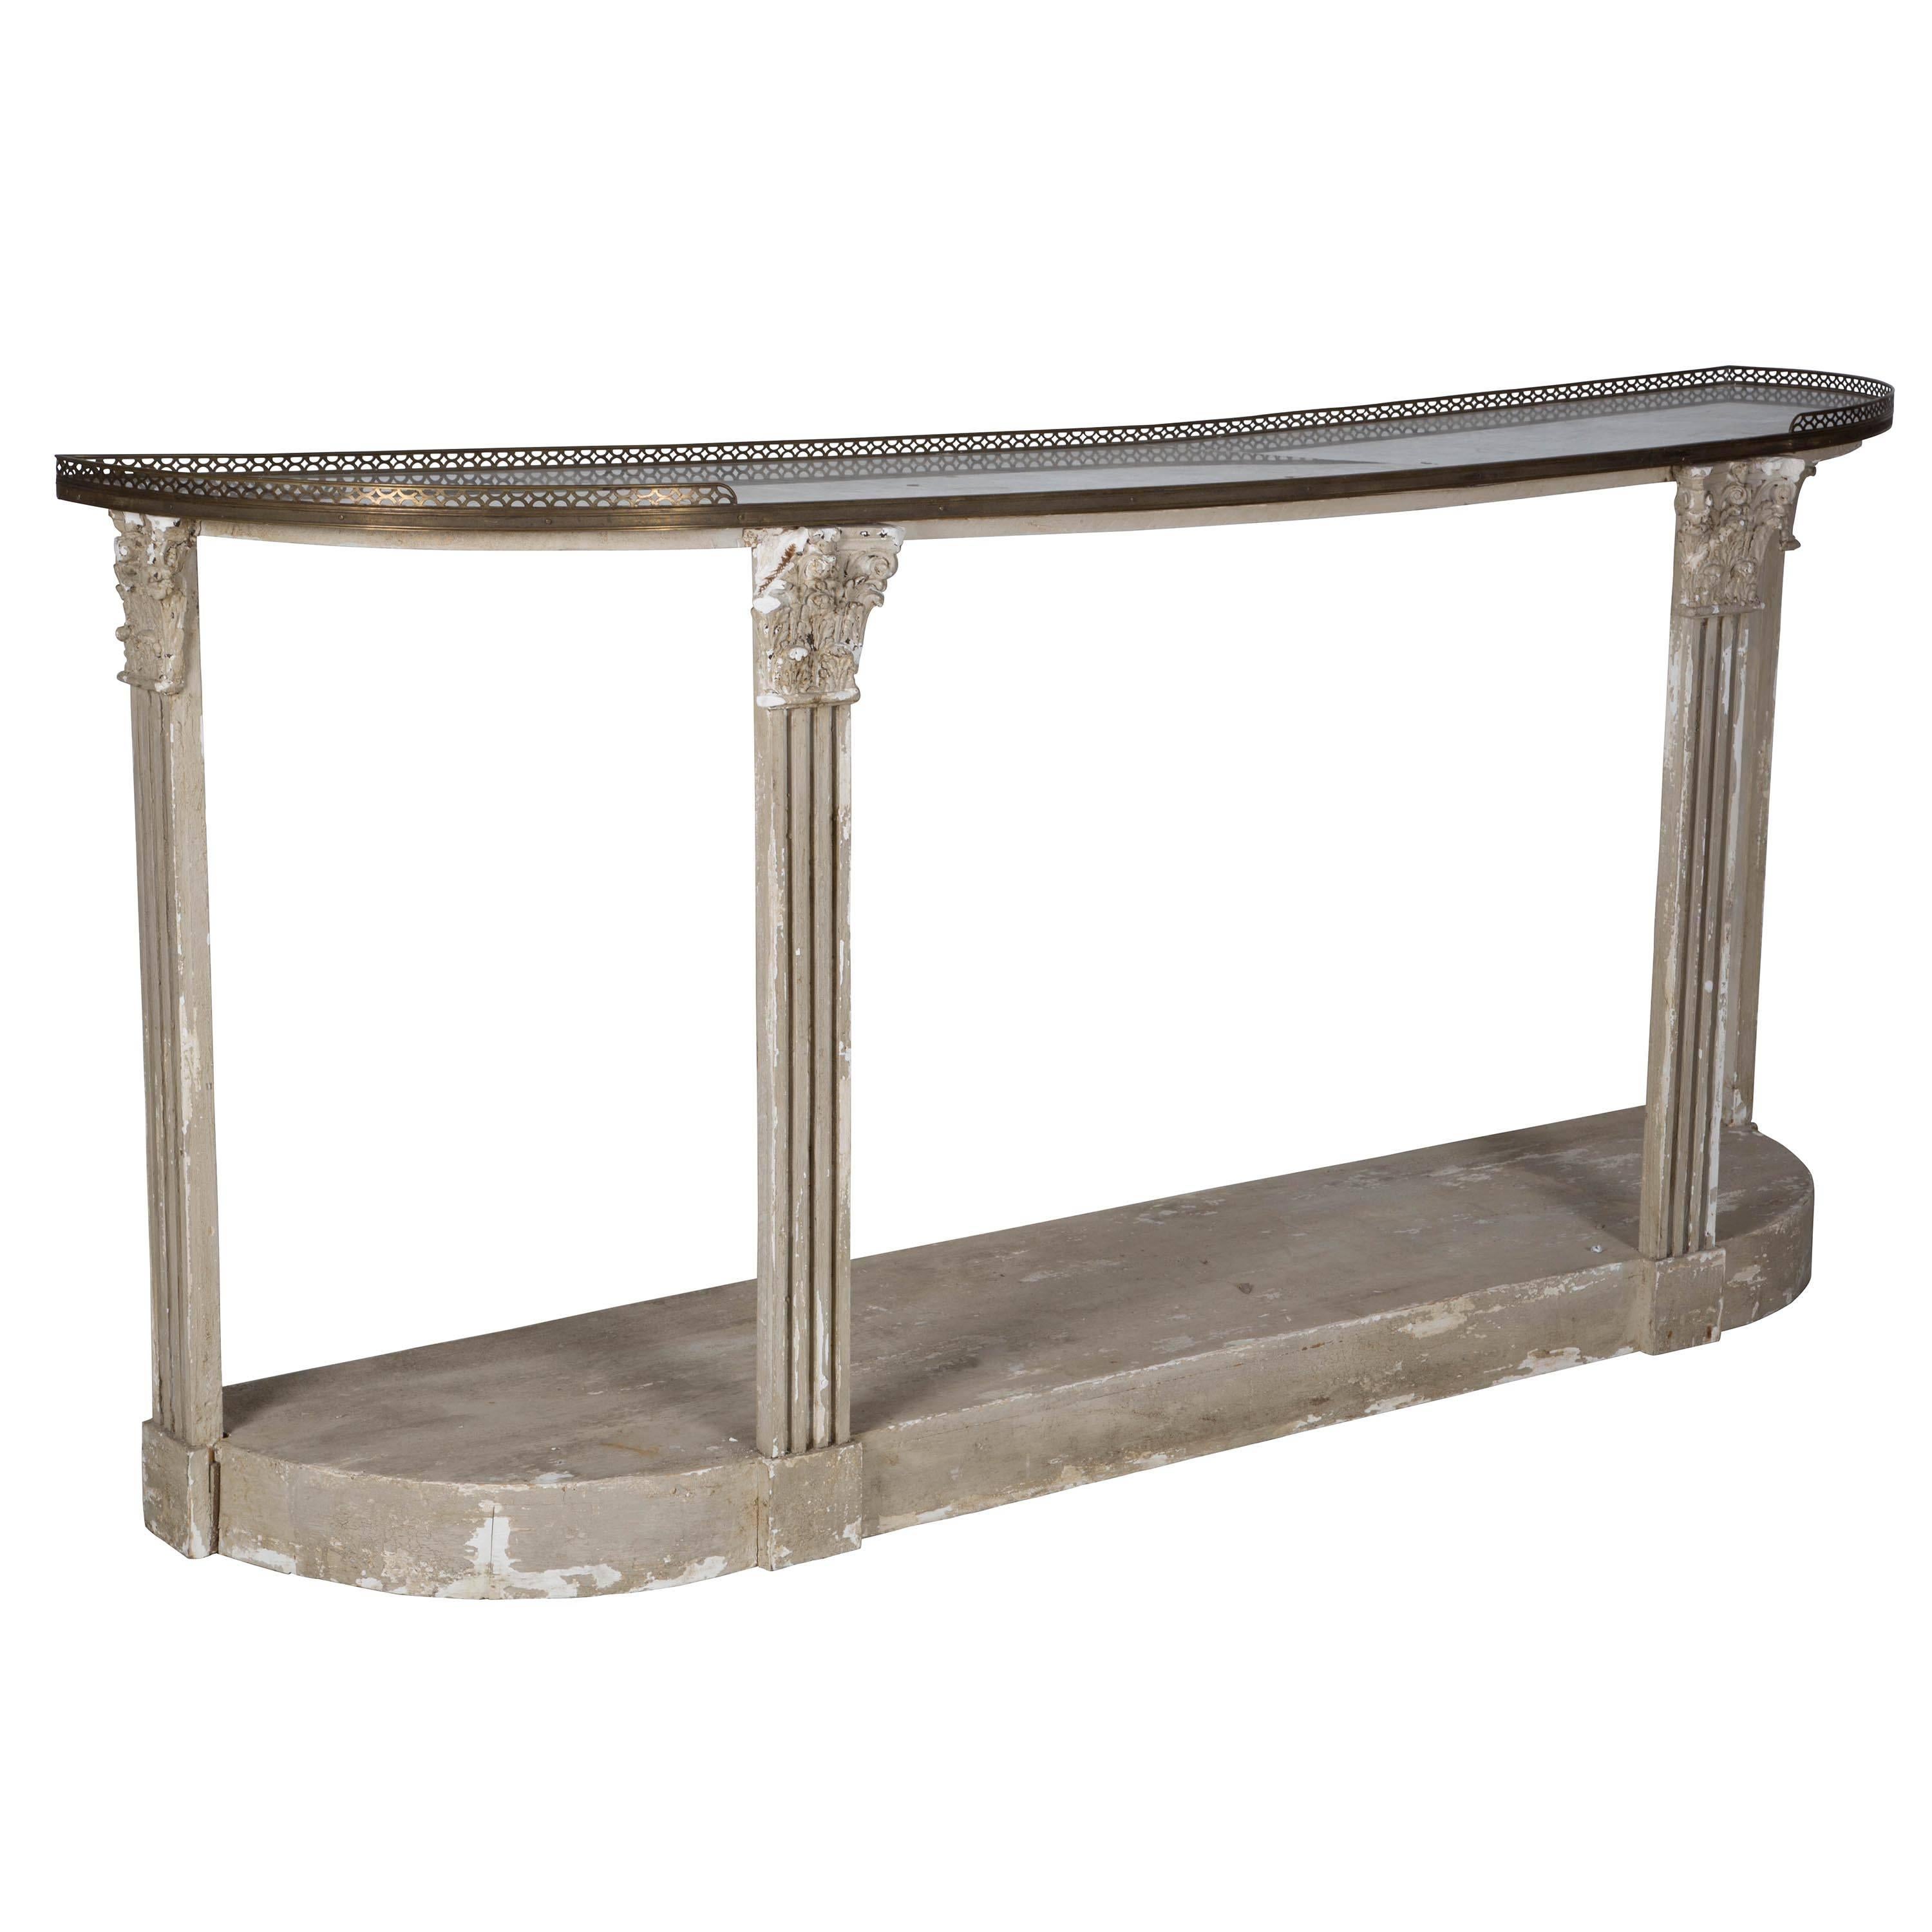 An Irish marble topped side table with brass gallery, retaining a lovely old white painted surface, circa 1920.